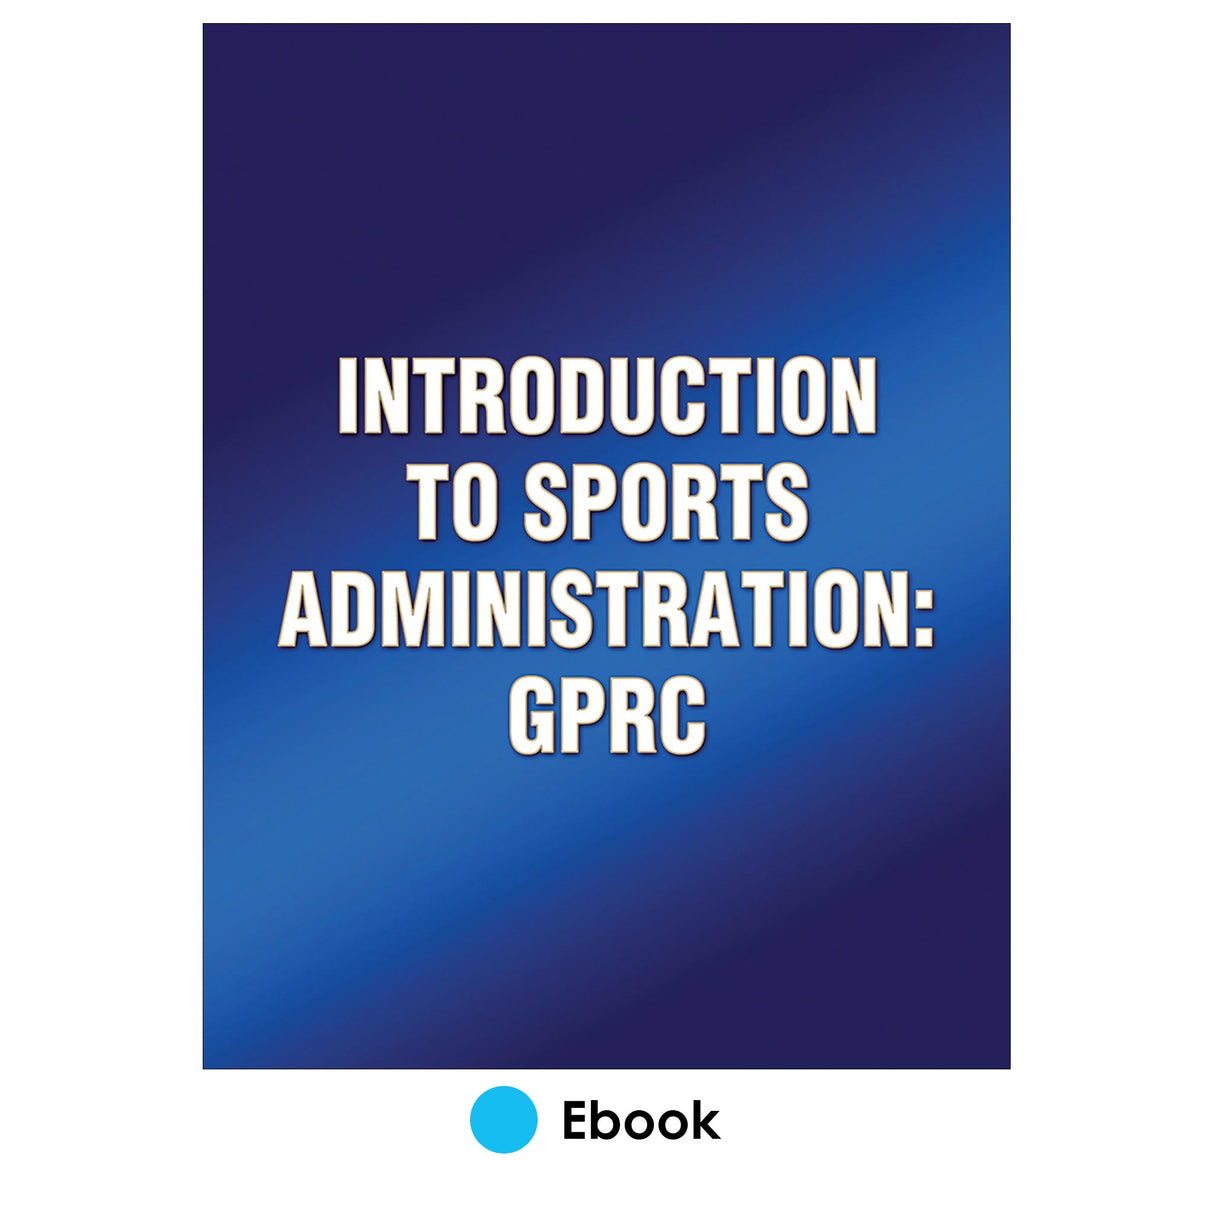 Introduction to Sports Administration: GPRC